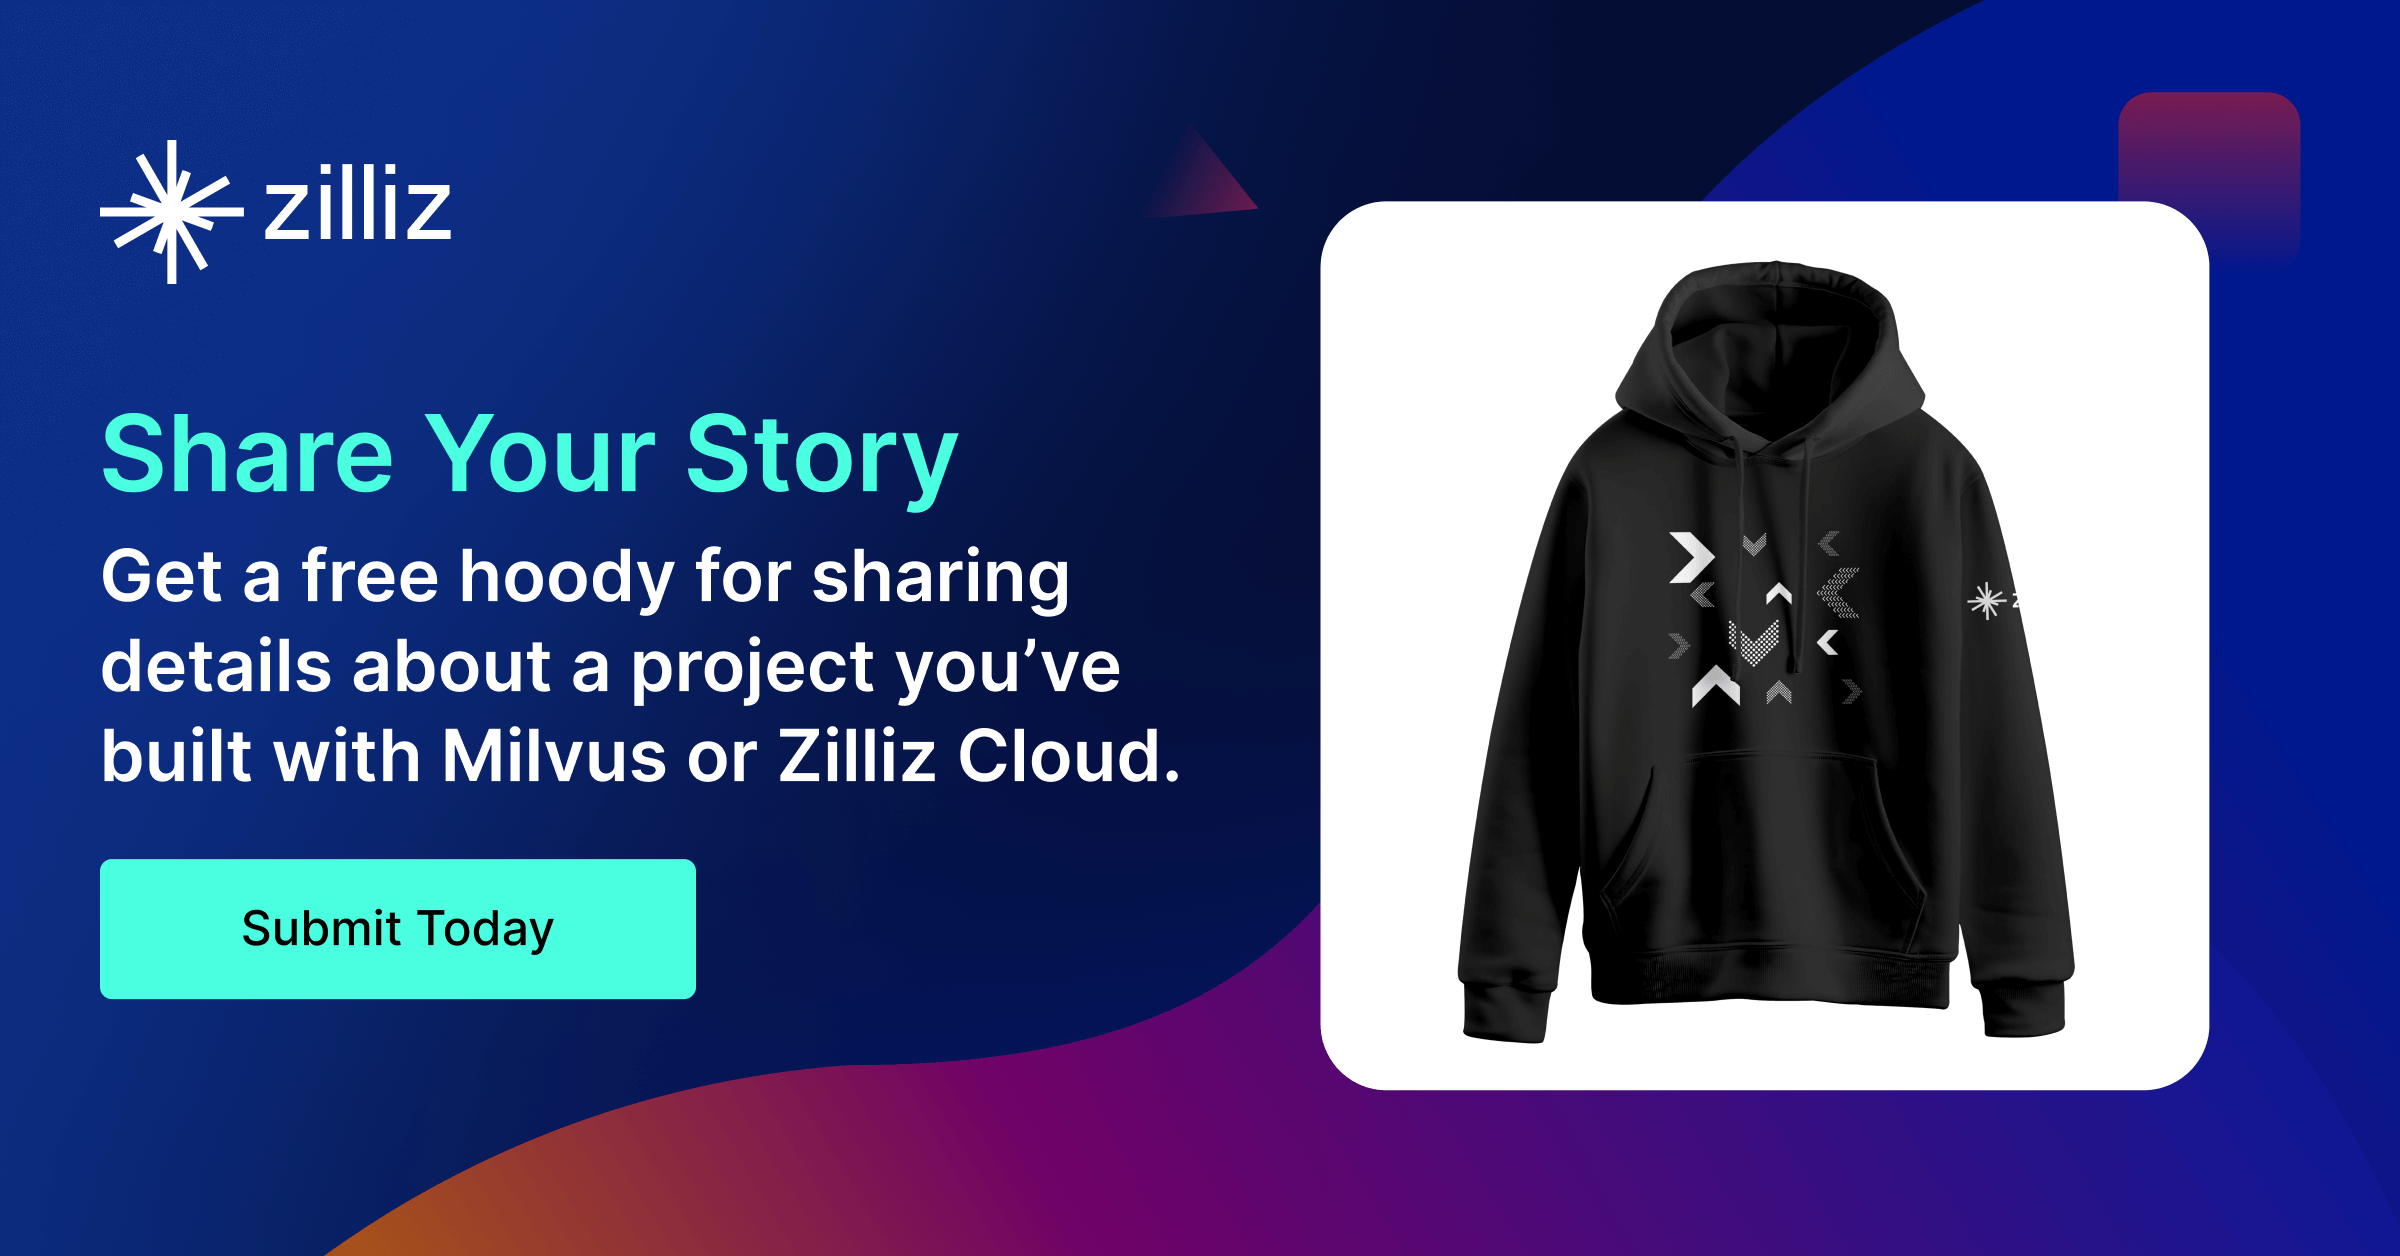 Share your story to get a hoody